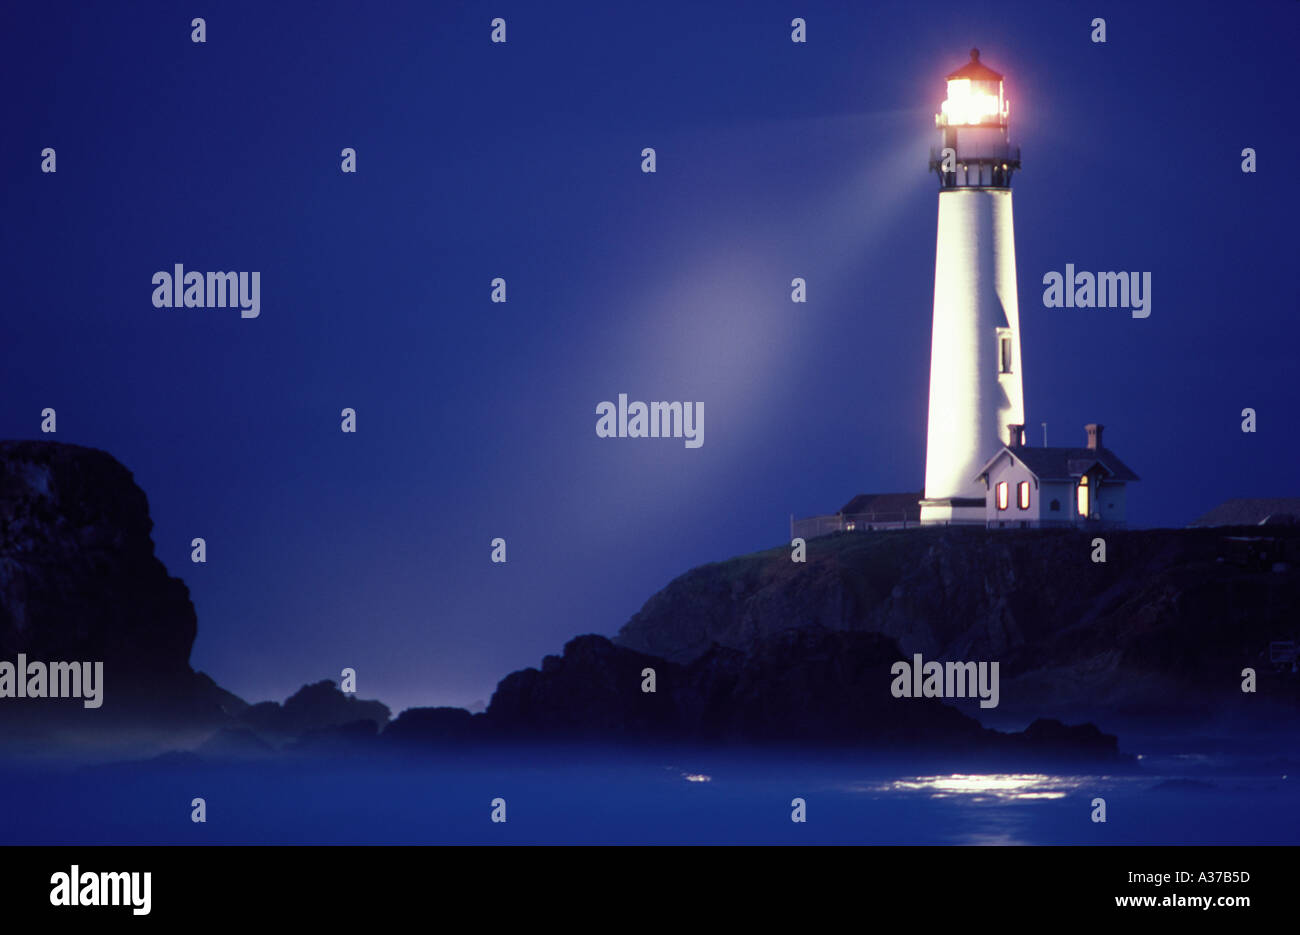 Pigeon Point Lighthouse casting beam across rocky shore at dark dawn sky. Image is not digitally altered - No photo shop.  REAL! Stock Photo